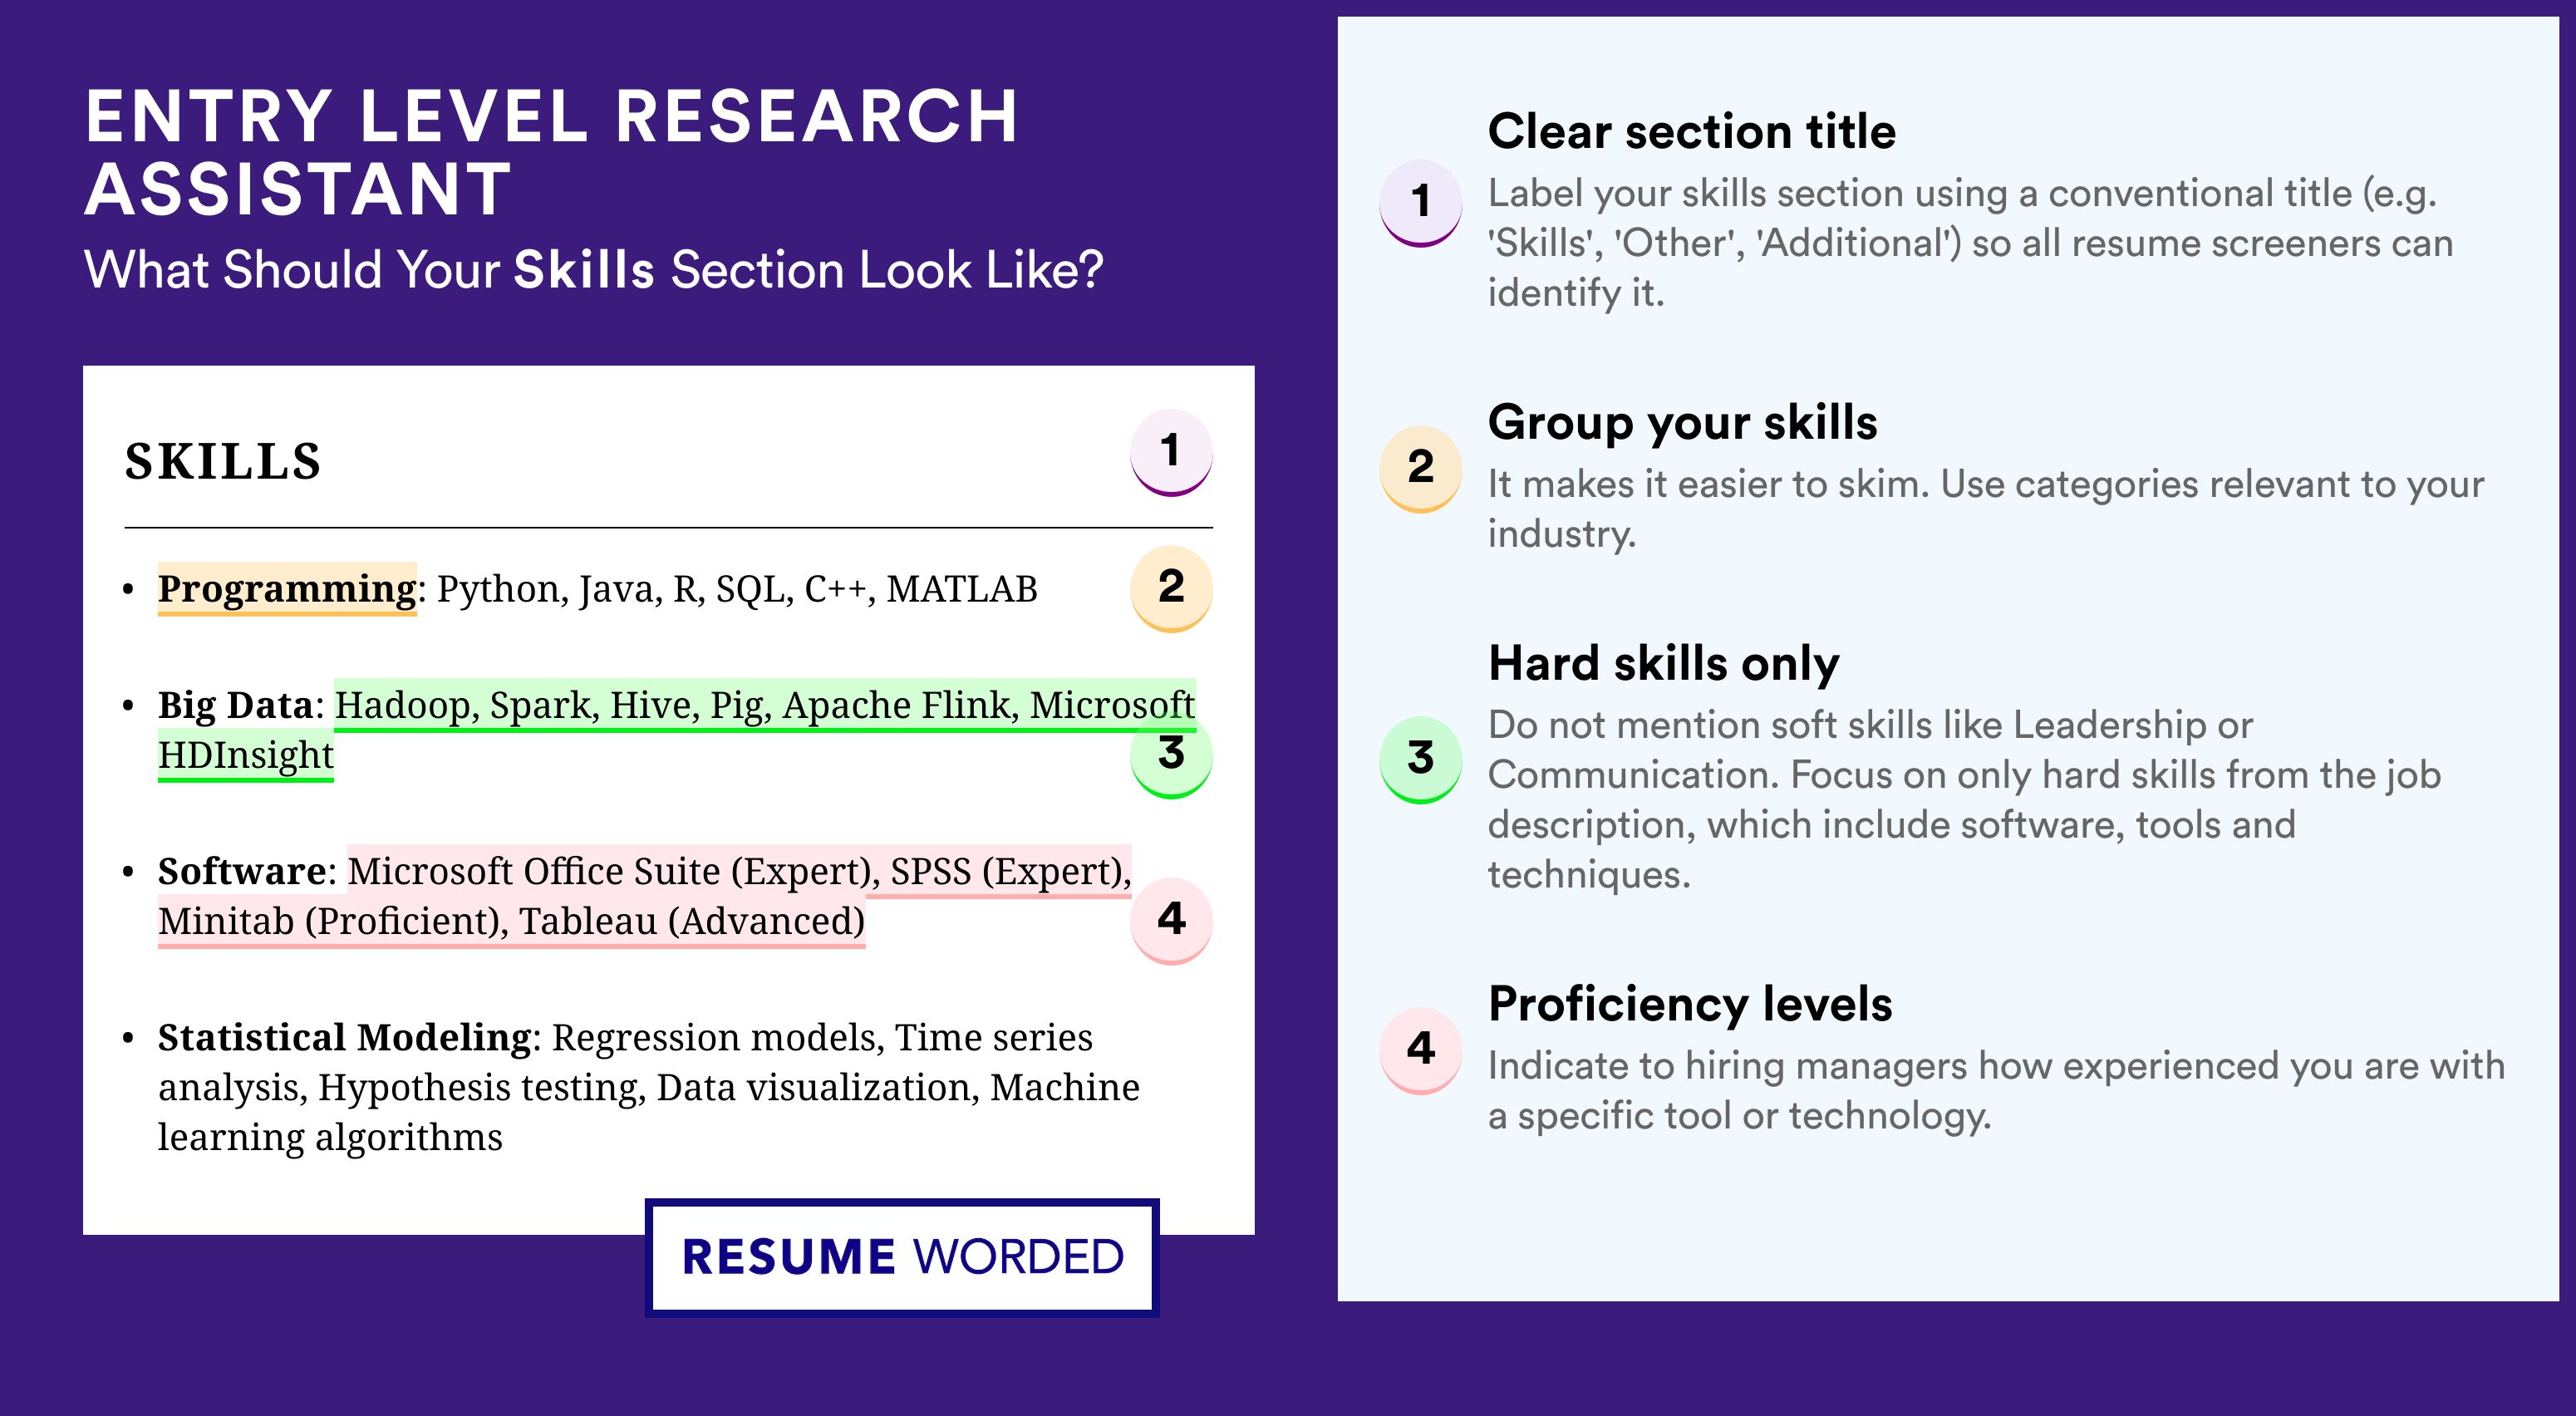 How To Write Your Skills Section - Entry Level Research Assistant Roles